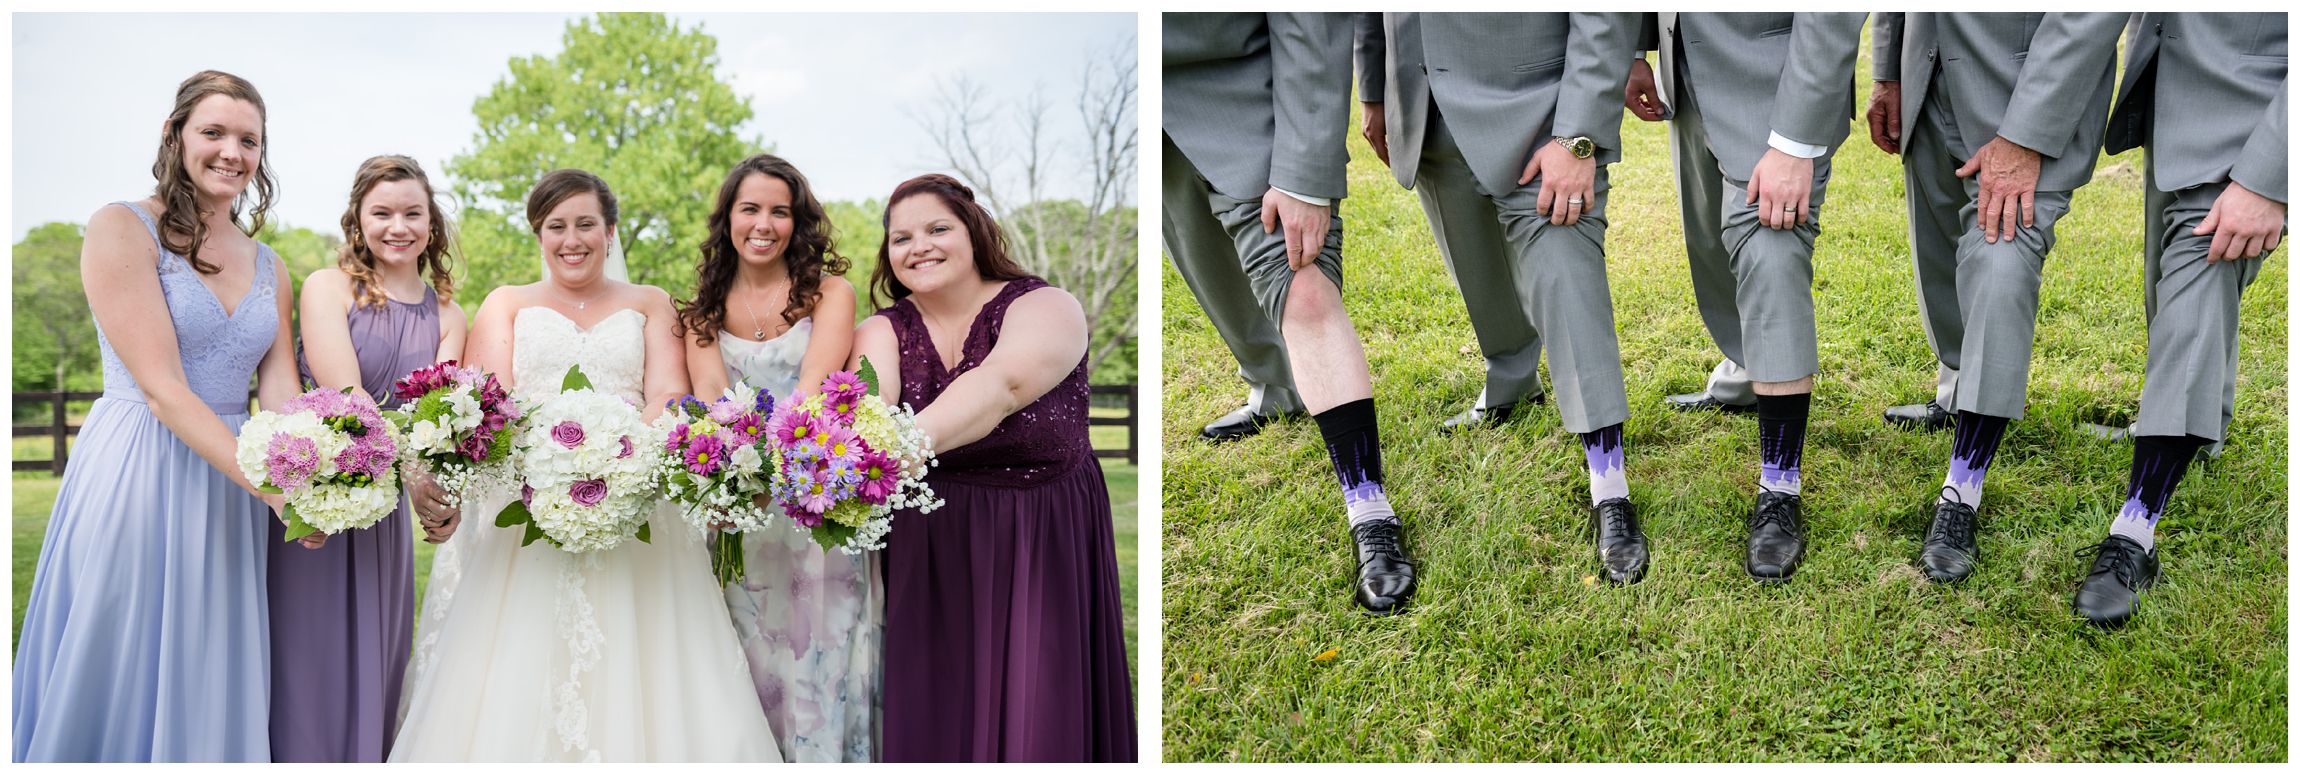 bouquets and socks of bridal party